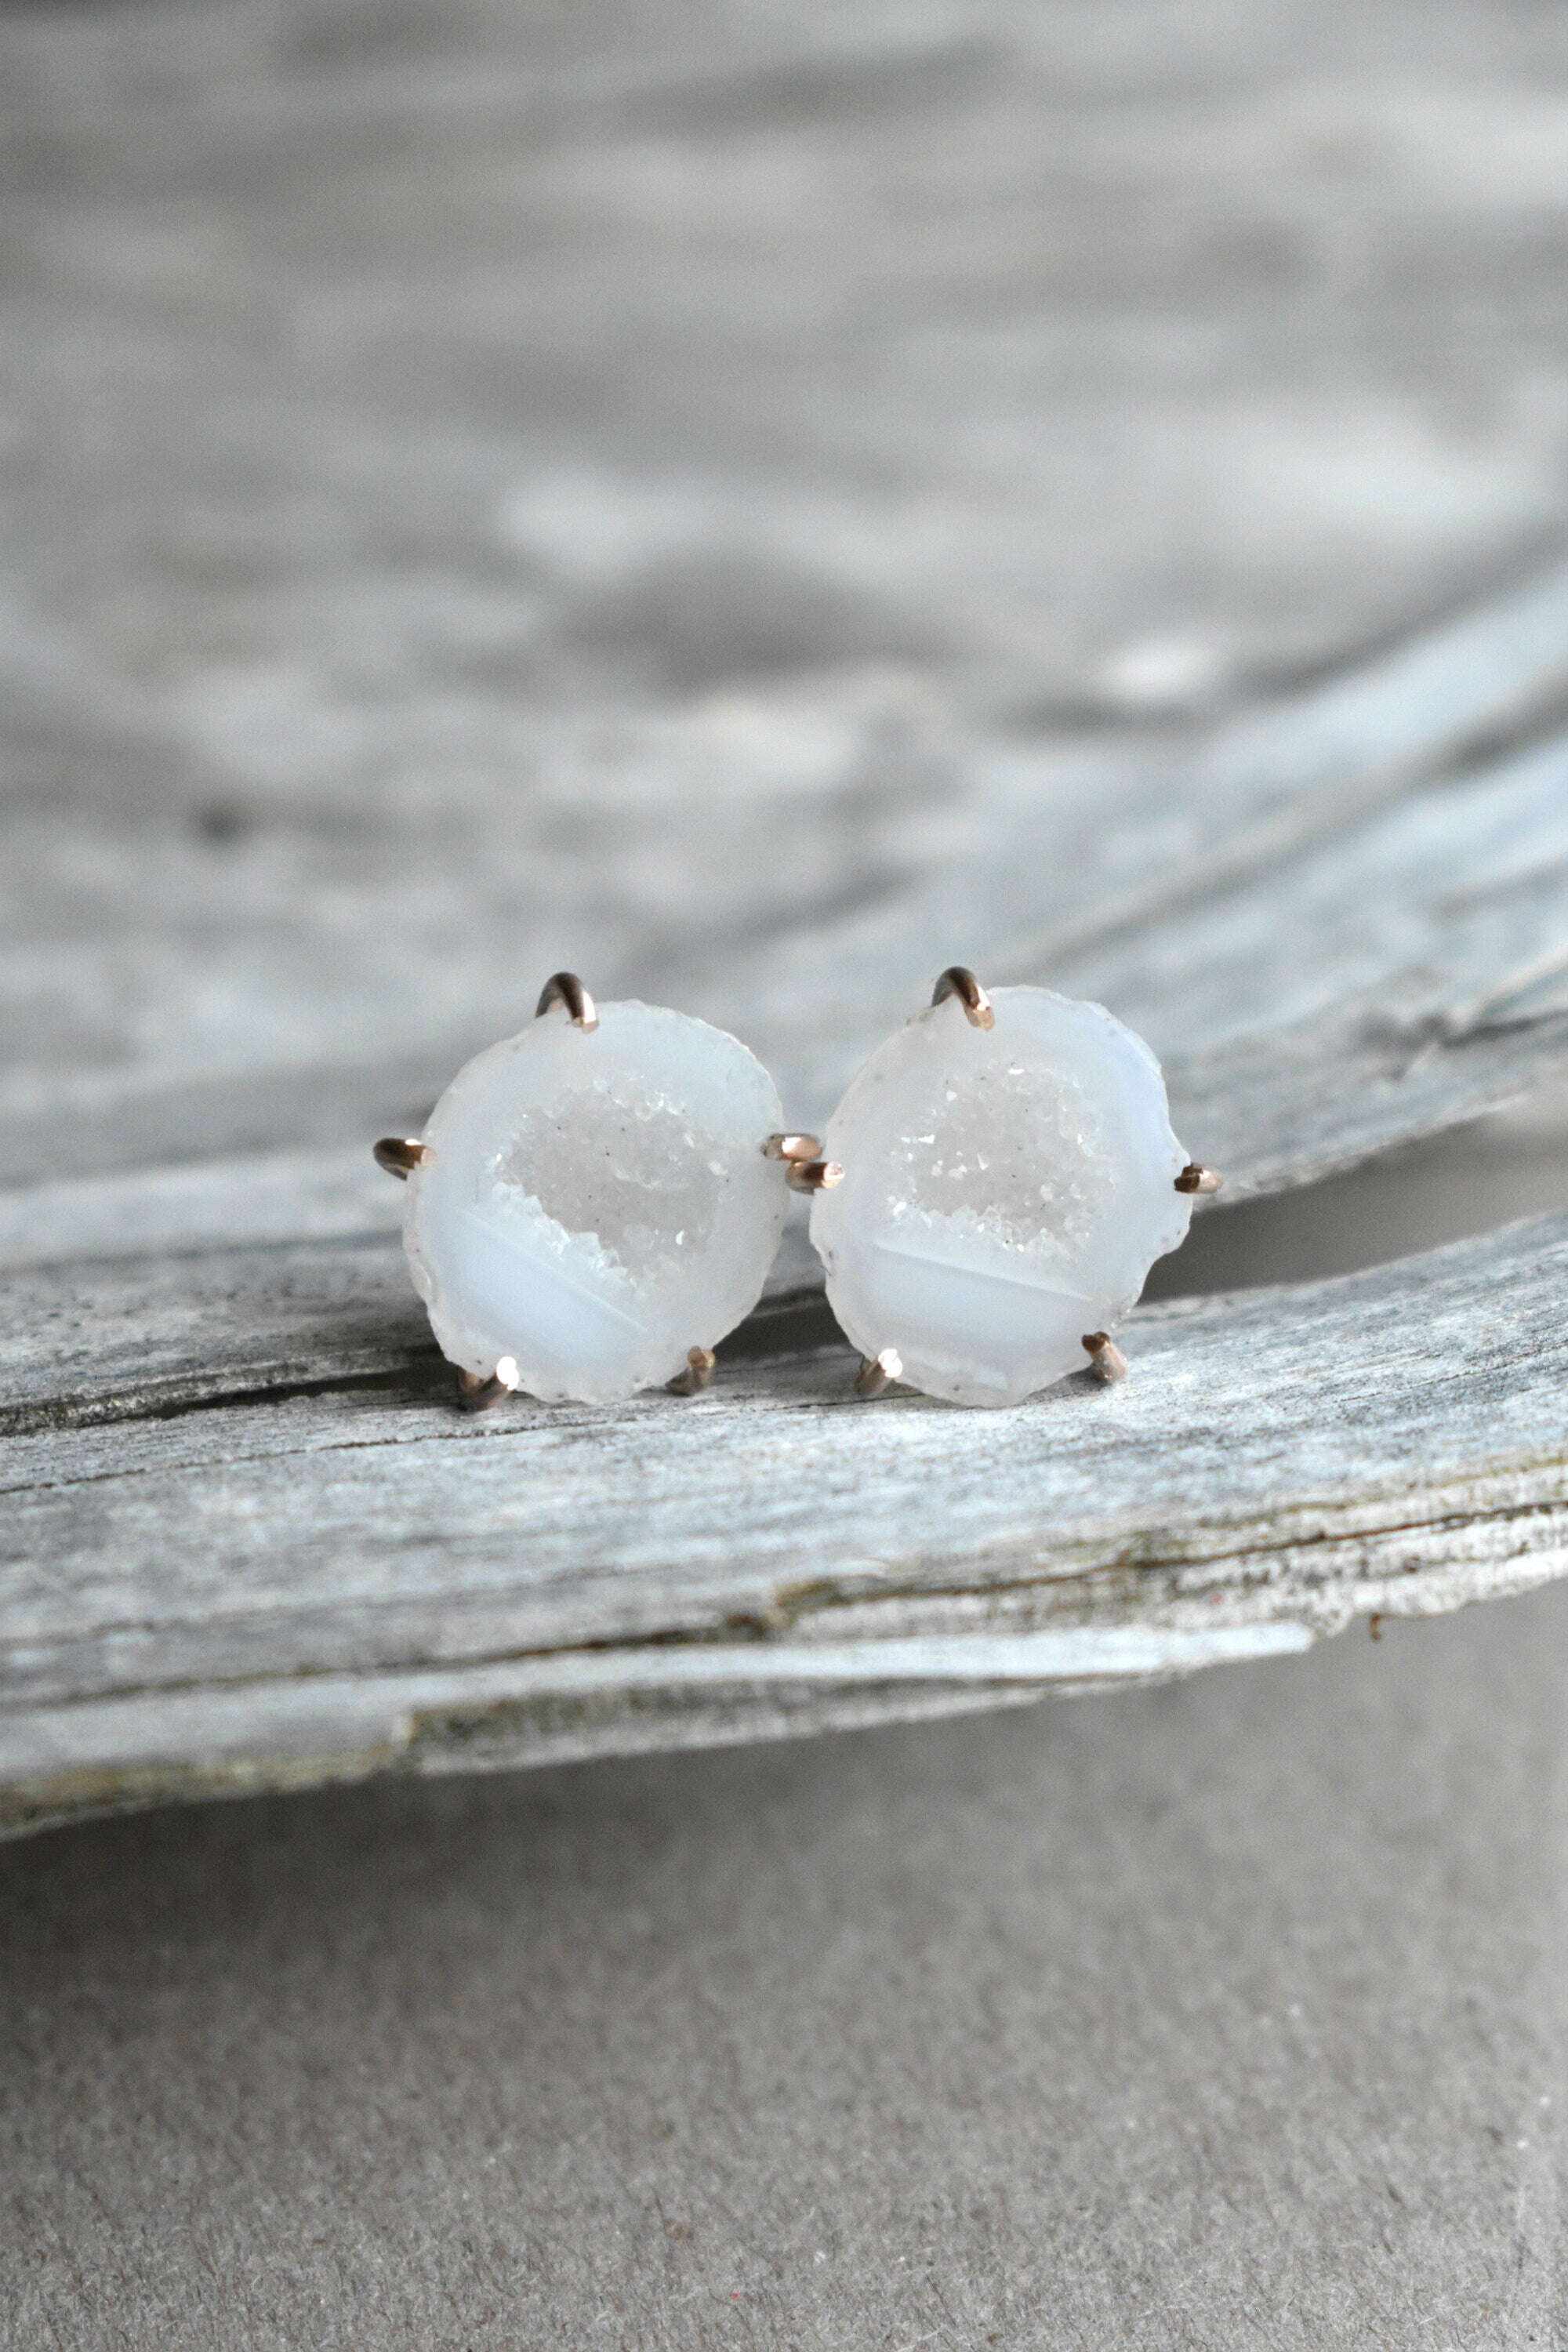 White Crystal Bridal Earrings, Glam Wedding Studs, Small White Geode in 14K Rose Gold Earrings, 7th Crown Chakra Jewelry, White Party Attire